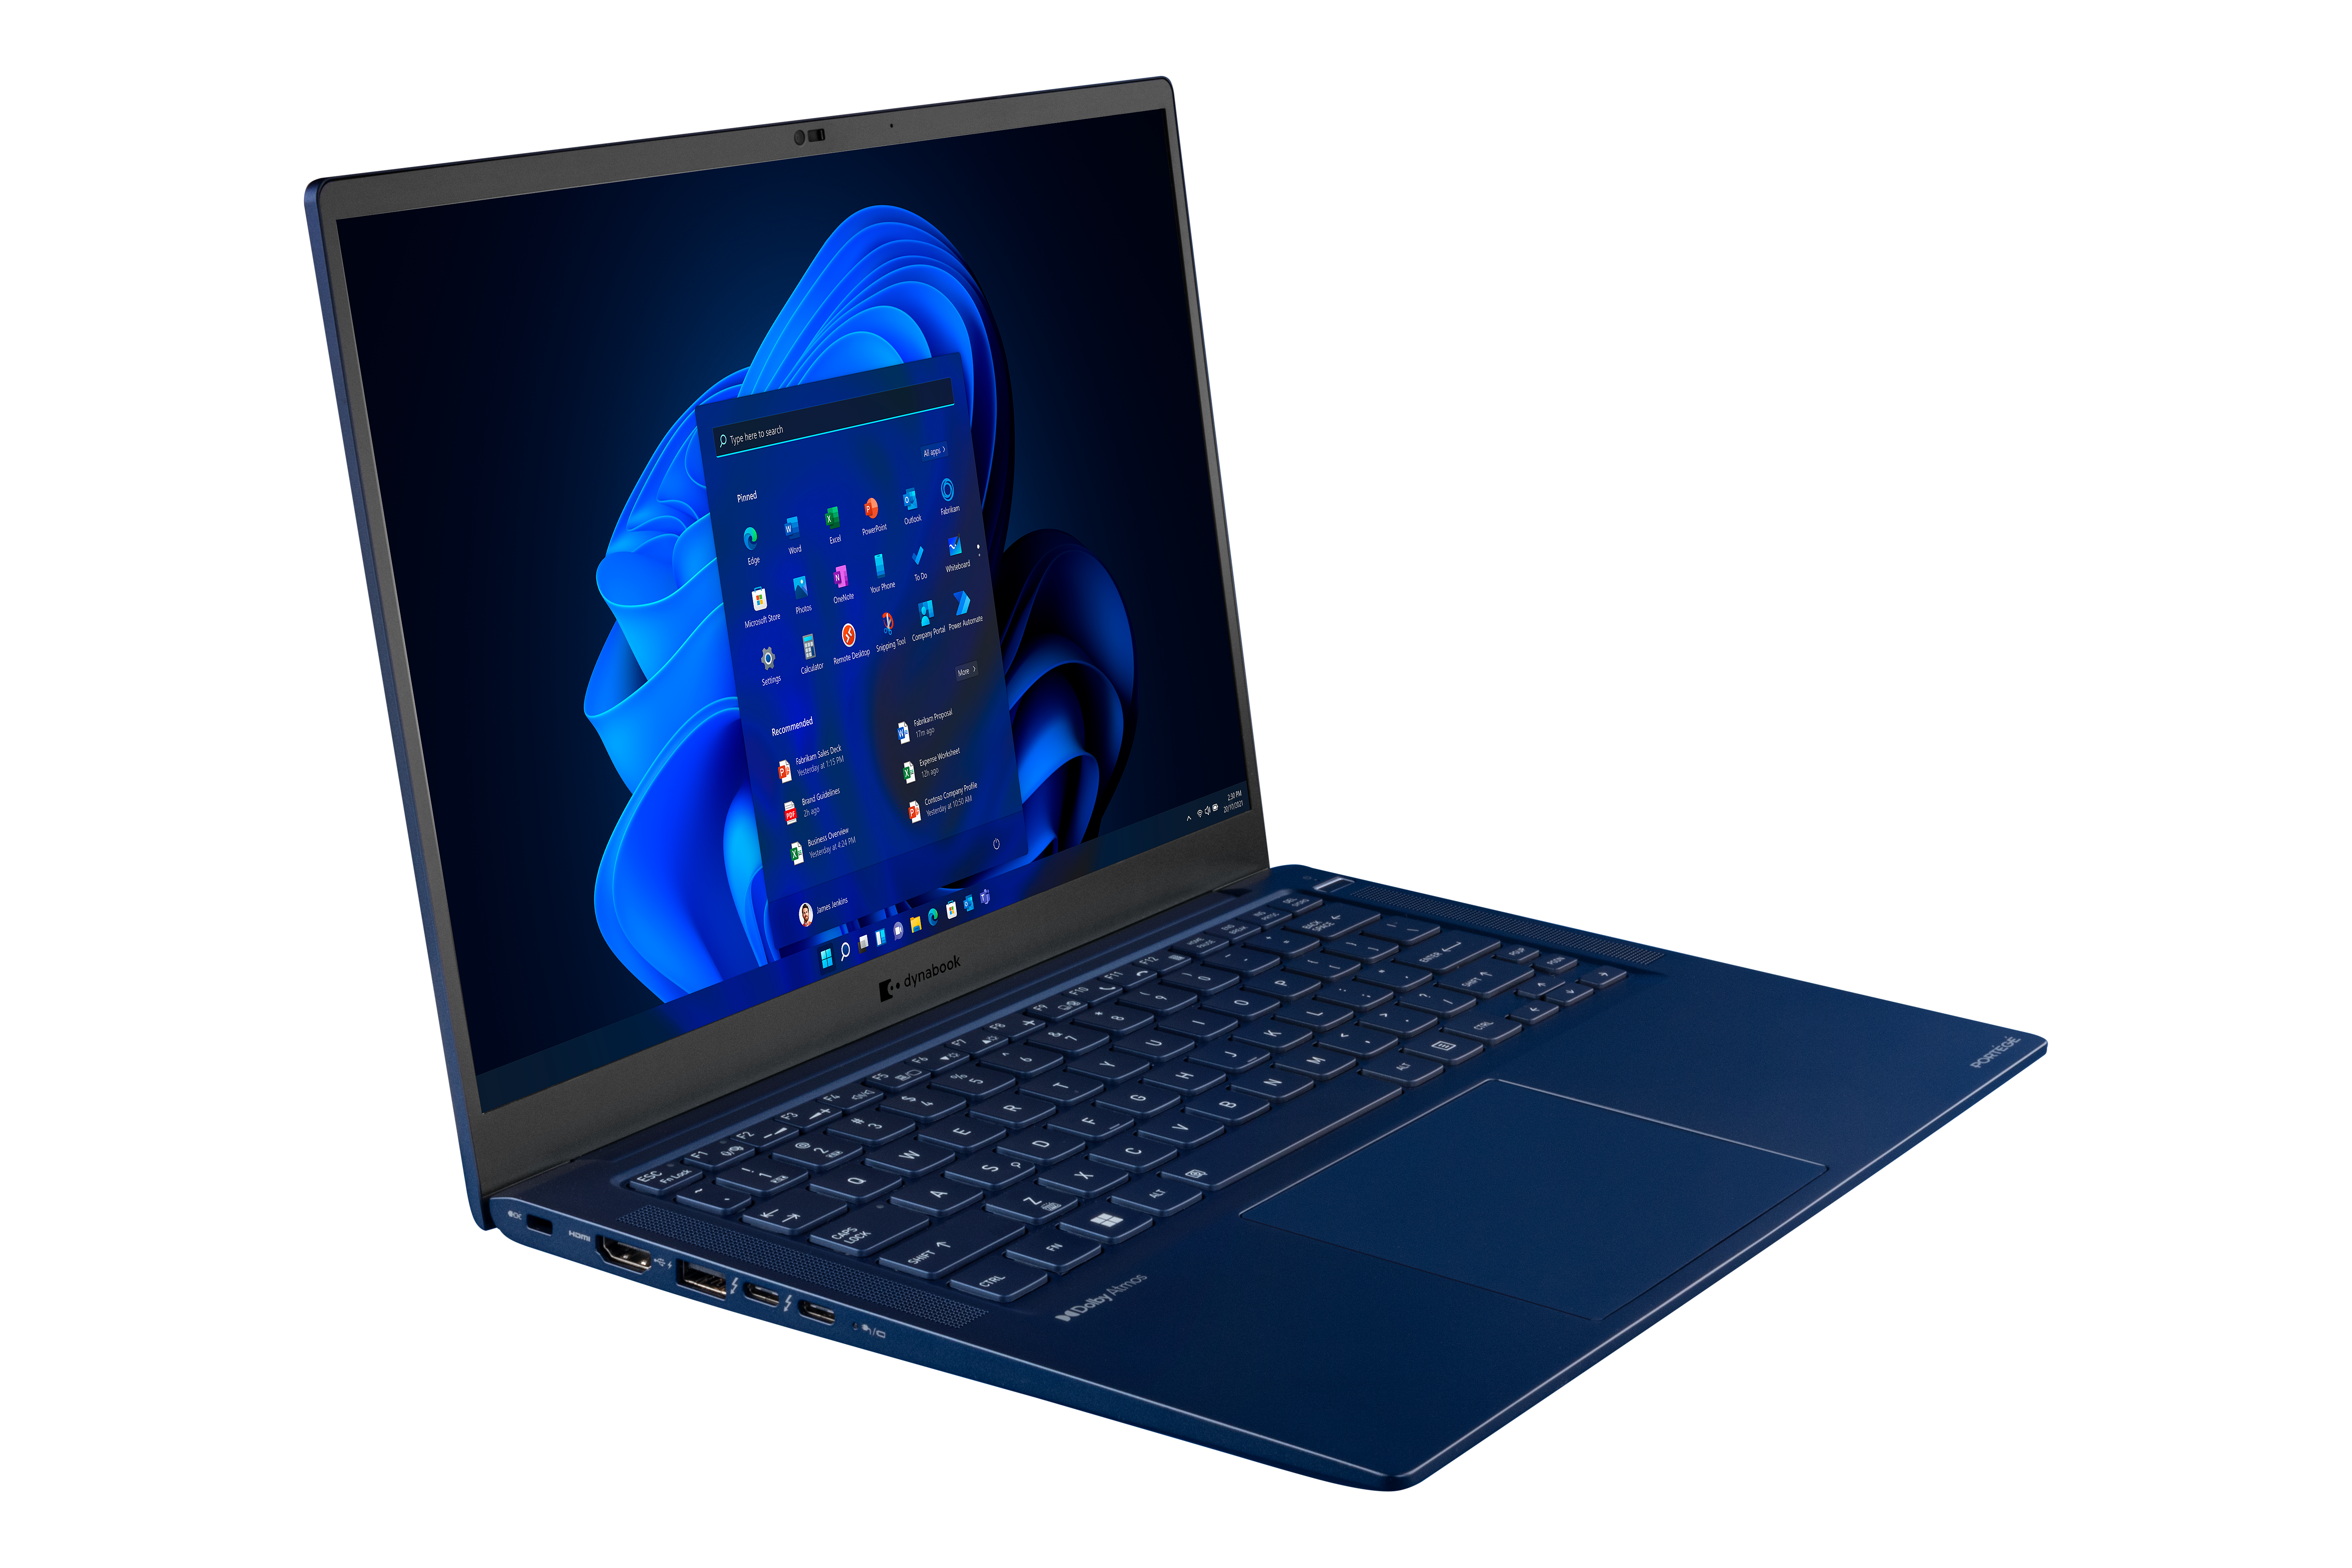 Dynabook’s extremely-proper Portege laptop weighs under 2 pounds